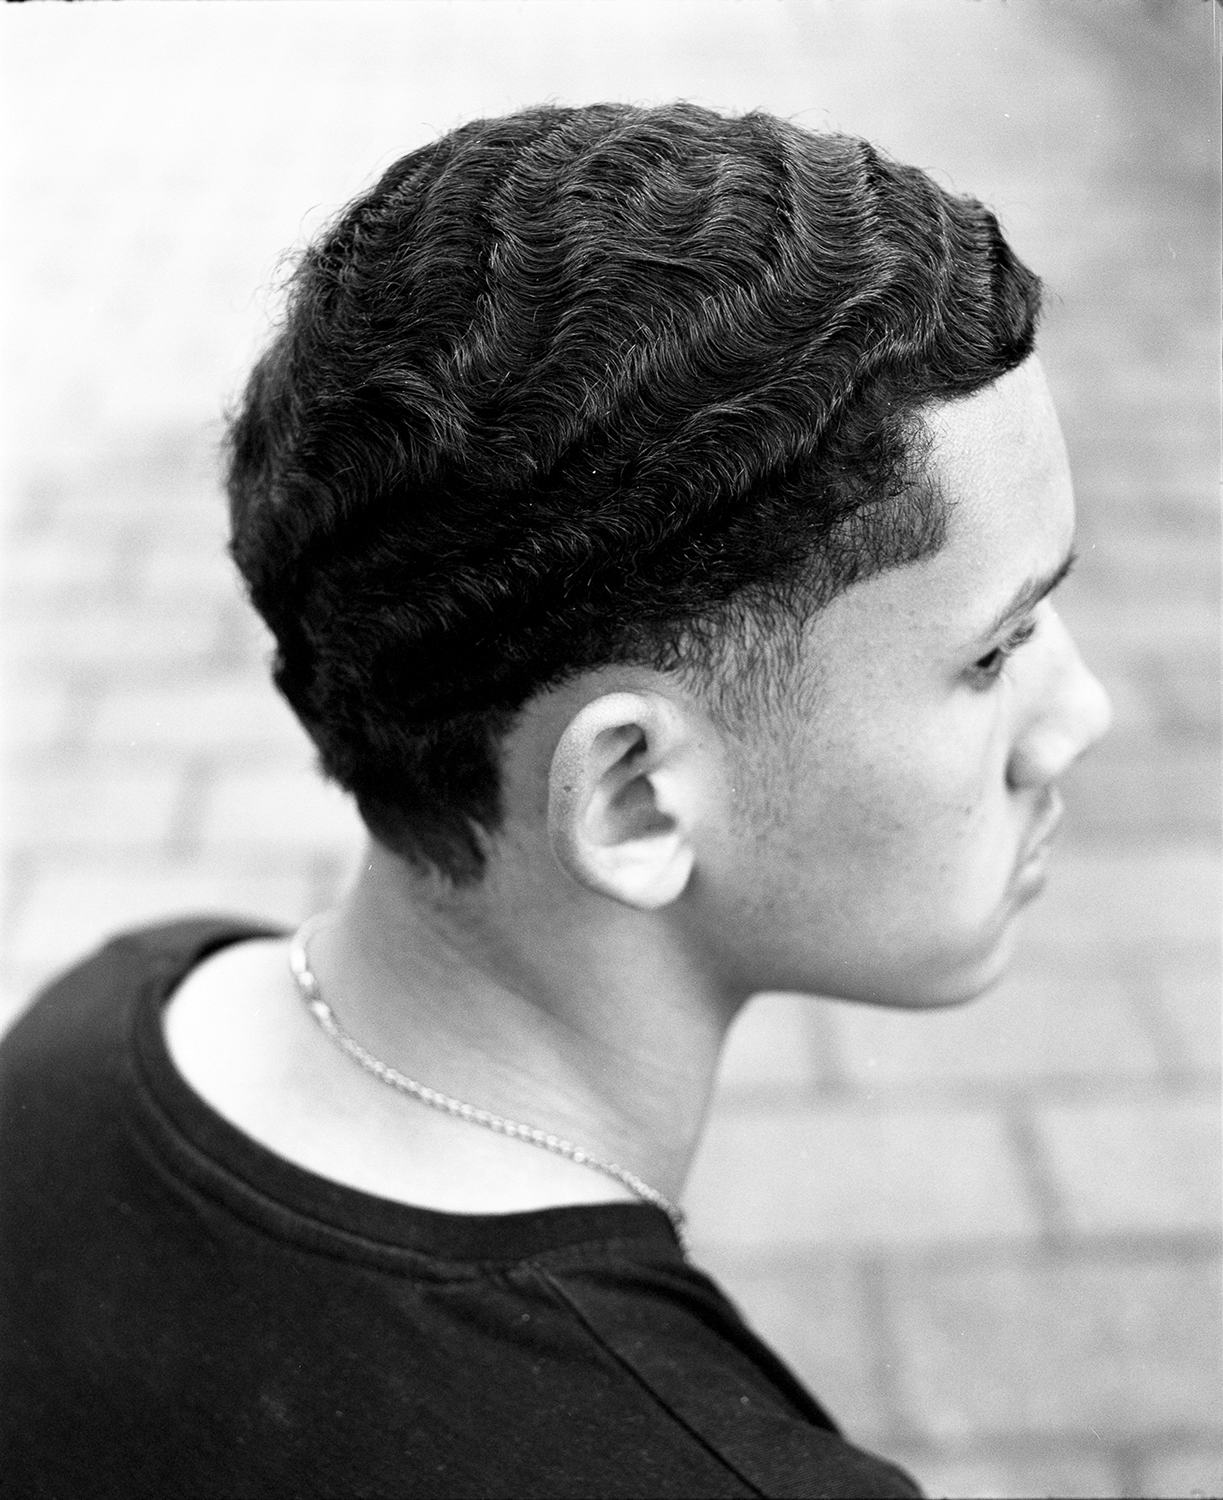 Black and white image of boy's hair by photographer Farren van Wyk